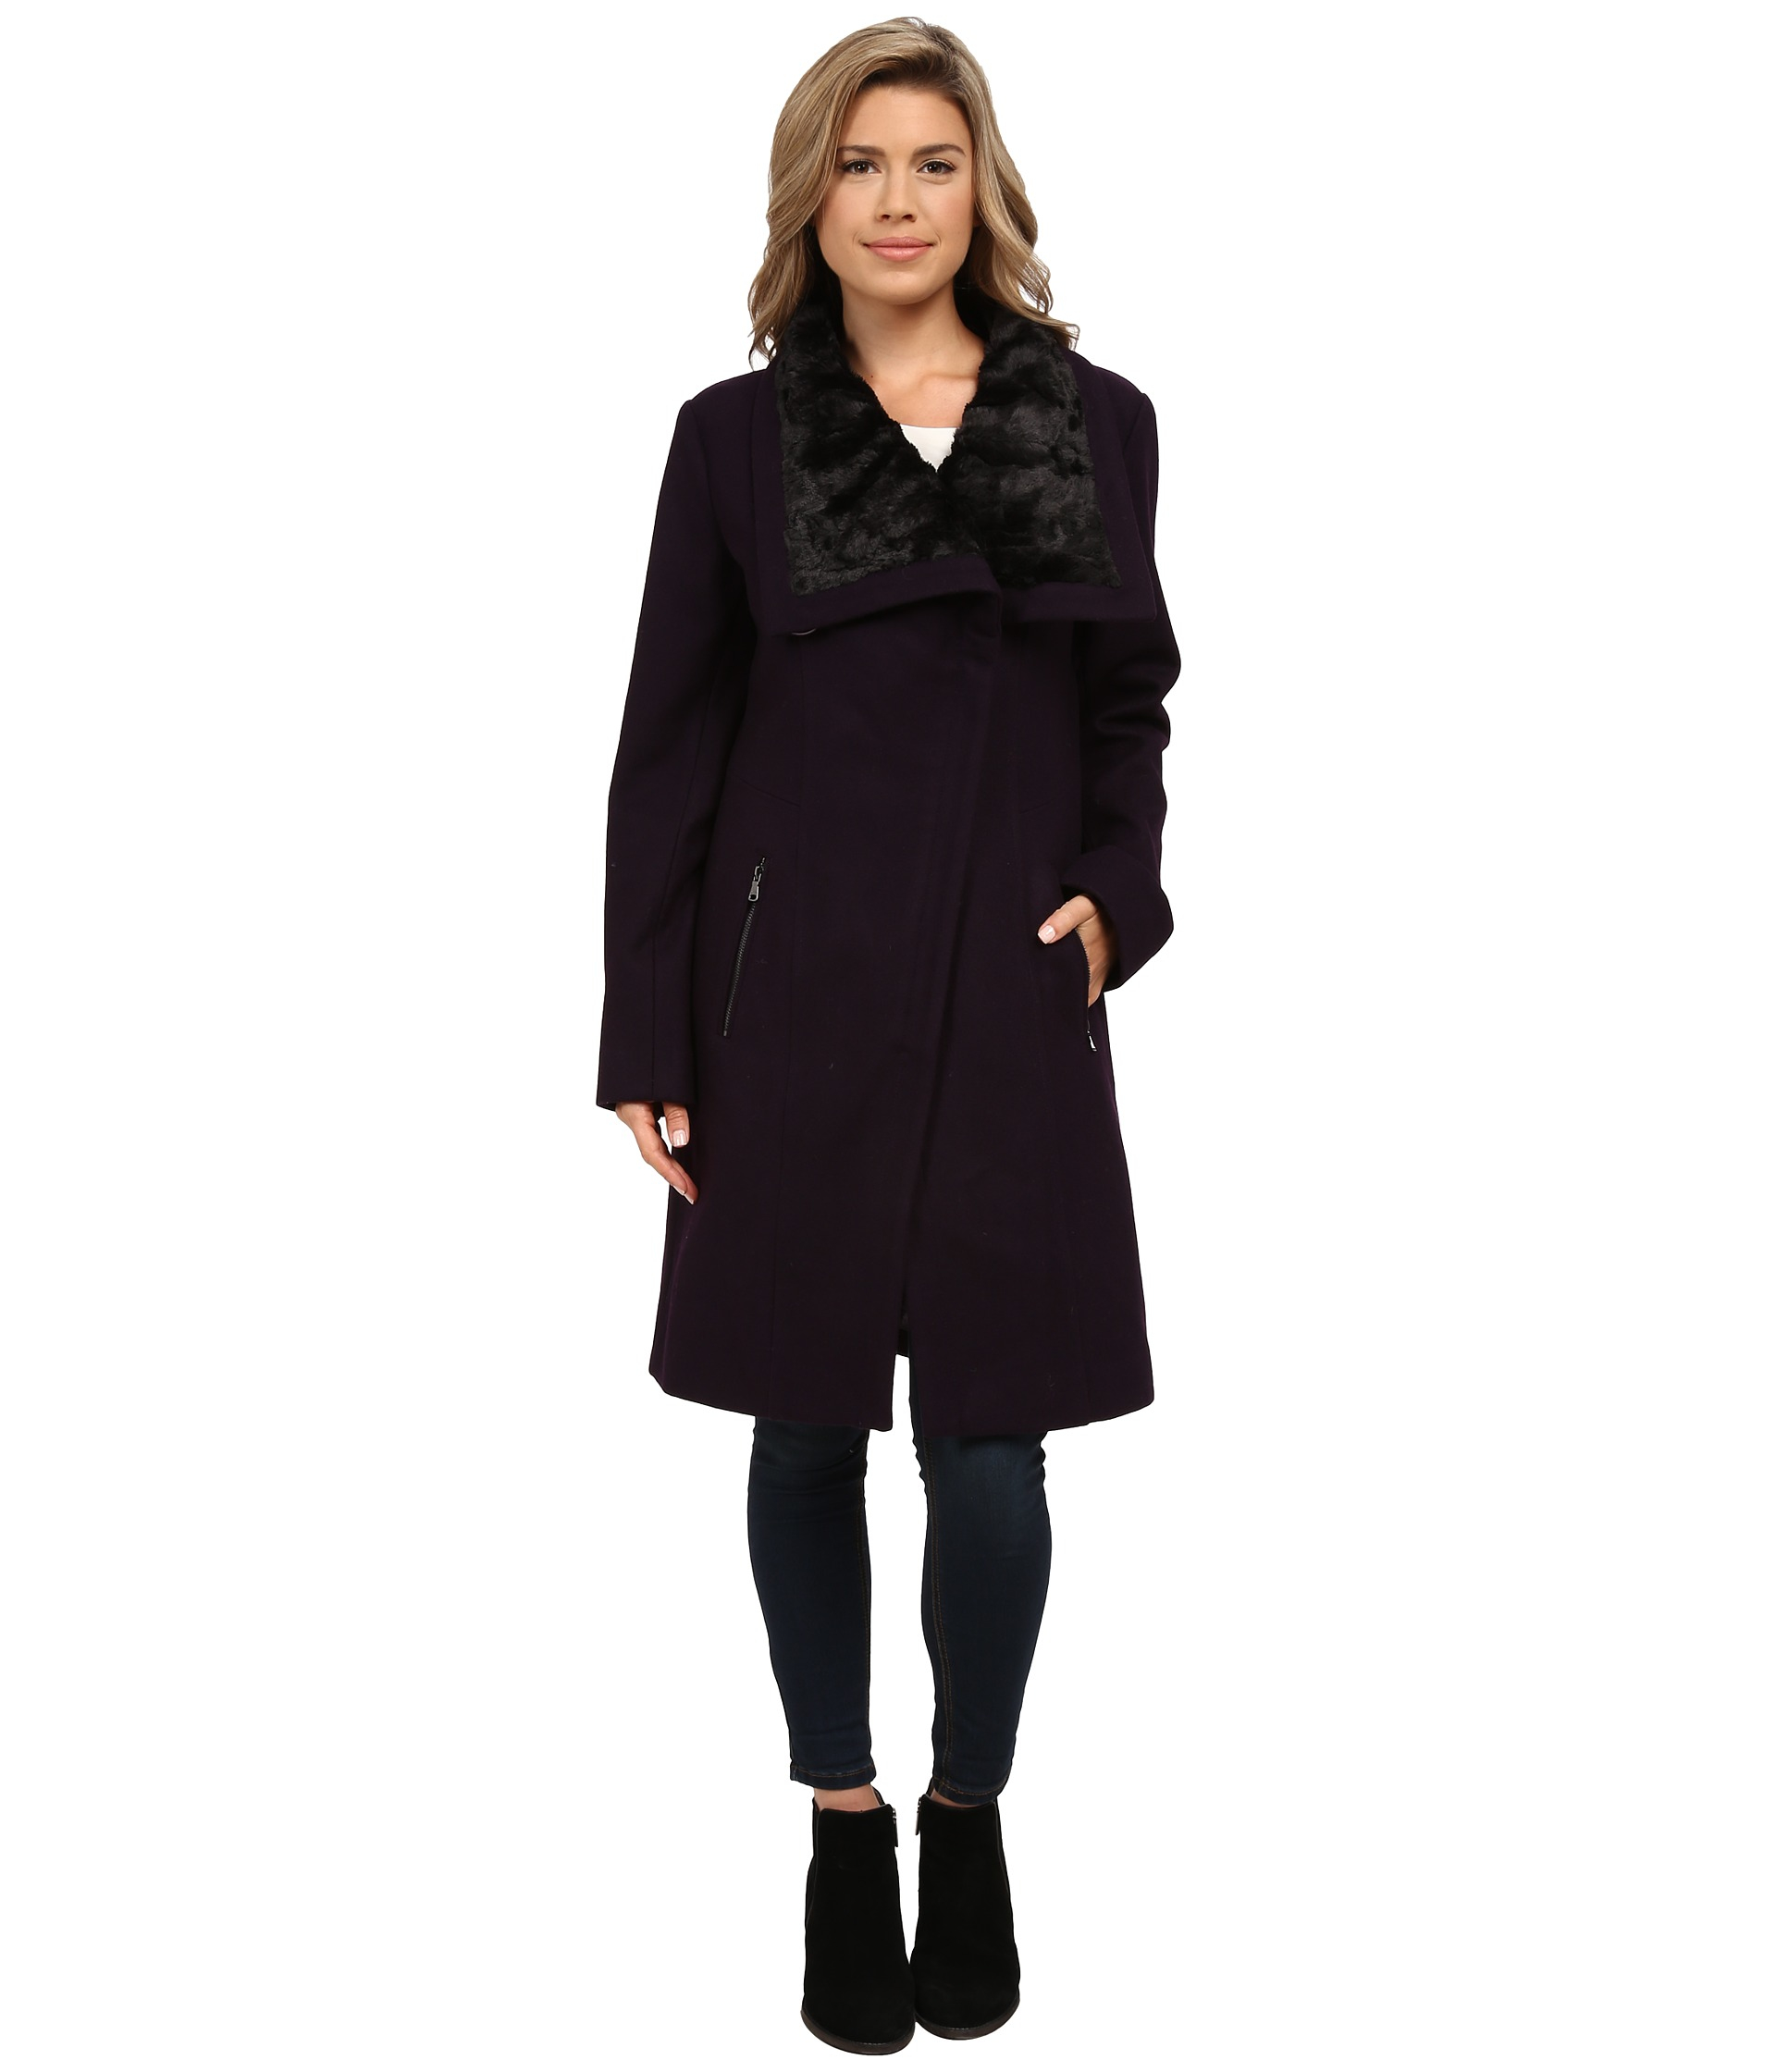 Jessica simpson Wool Coat With Faux Fur Collar in Purple | Lyst1920 x 2240